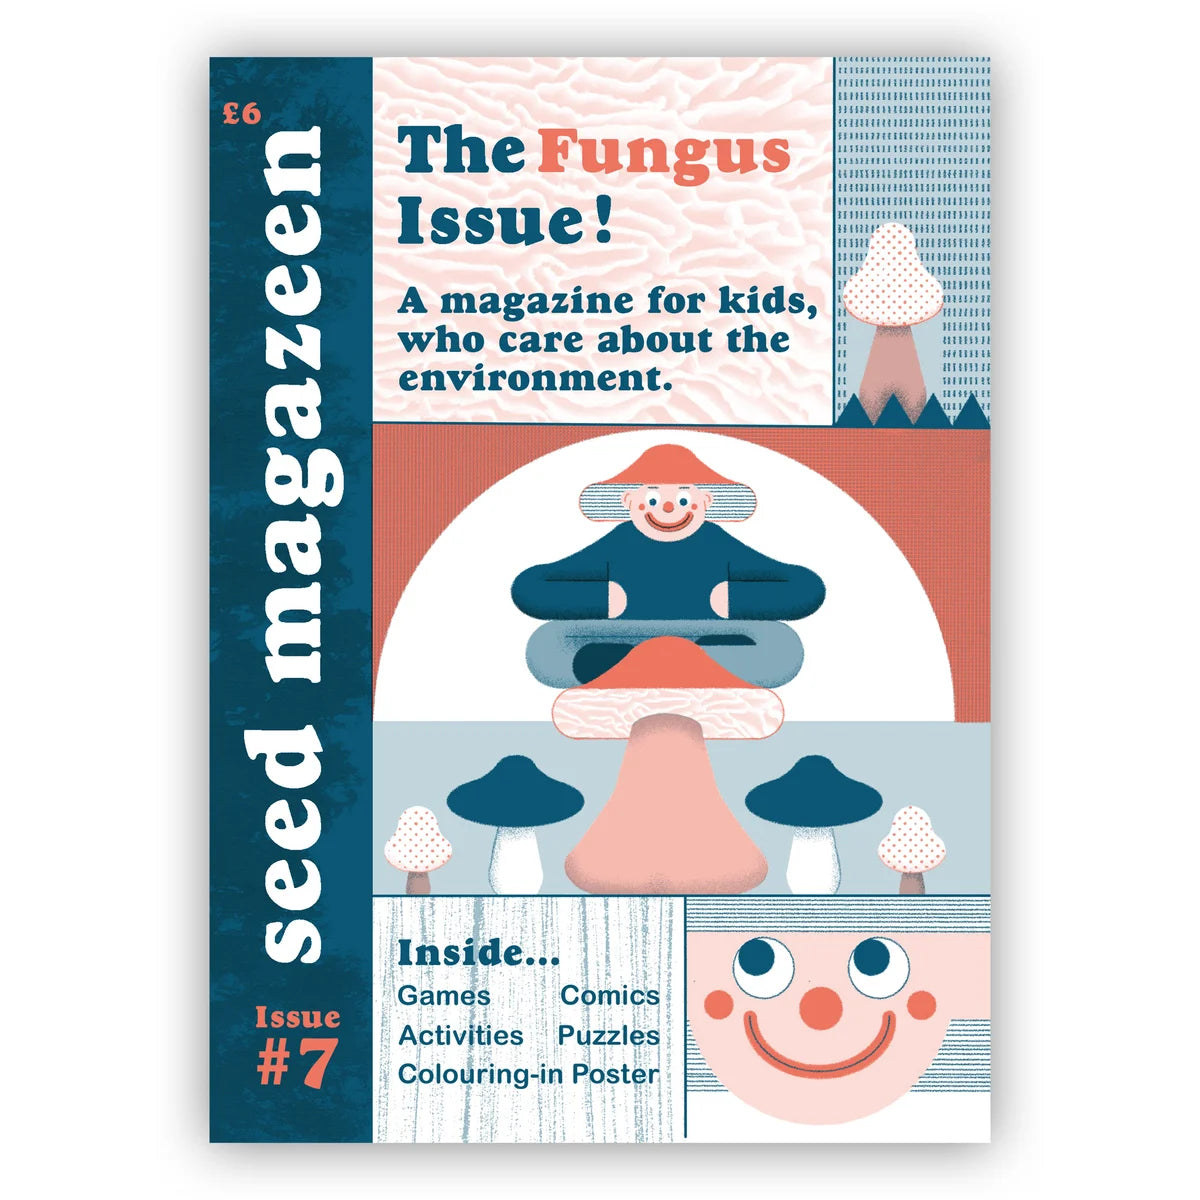 Seed Magazeen #7 - The Fungus Issue